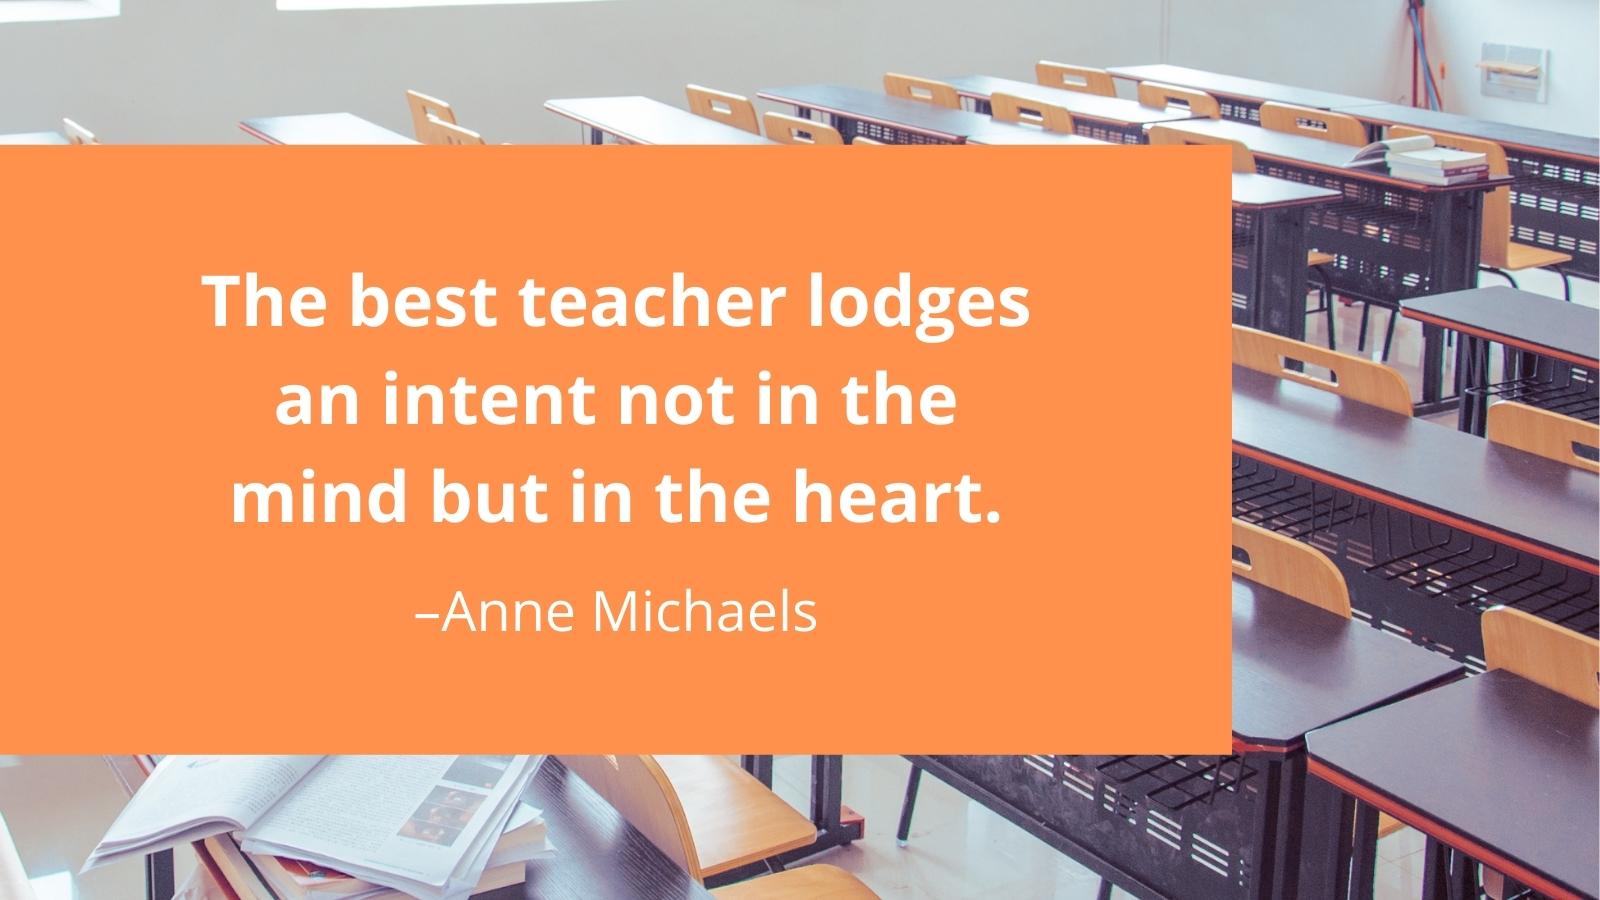 The best teacher lodges an intent not in the mind but in the heart.